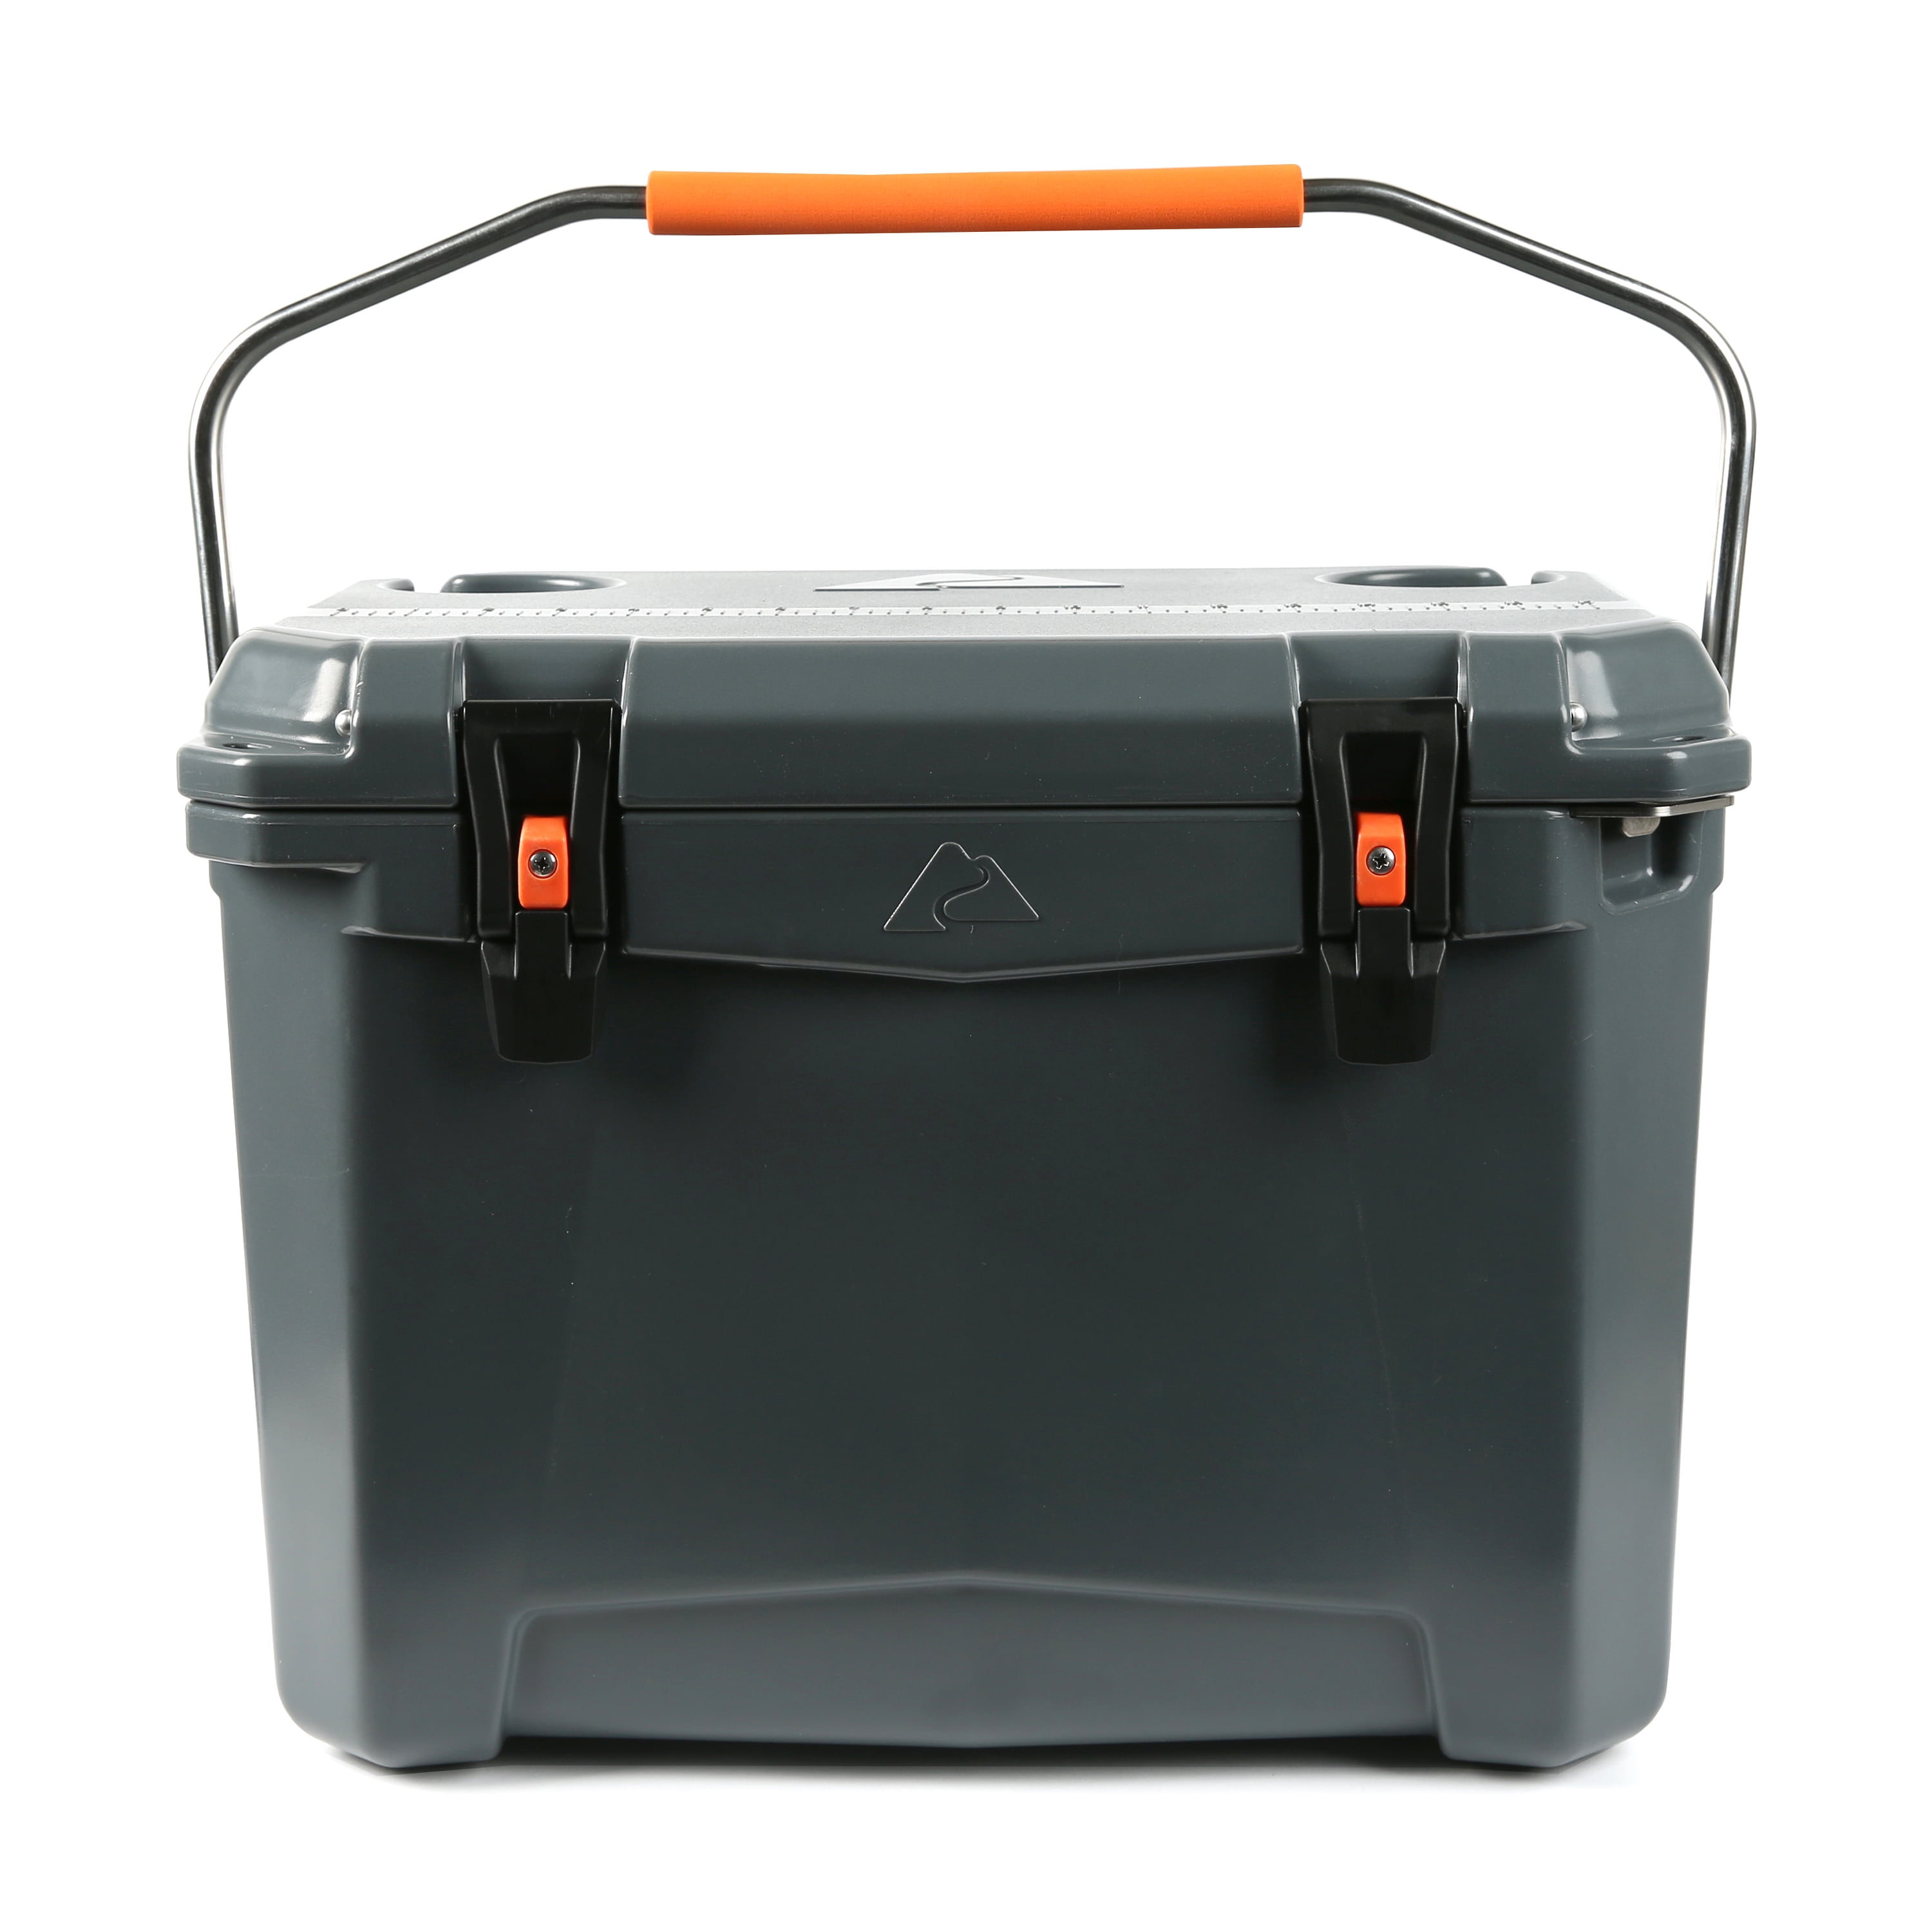 Ozark Trail 26 Quart High Performance Roto-Molded Cooler with